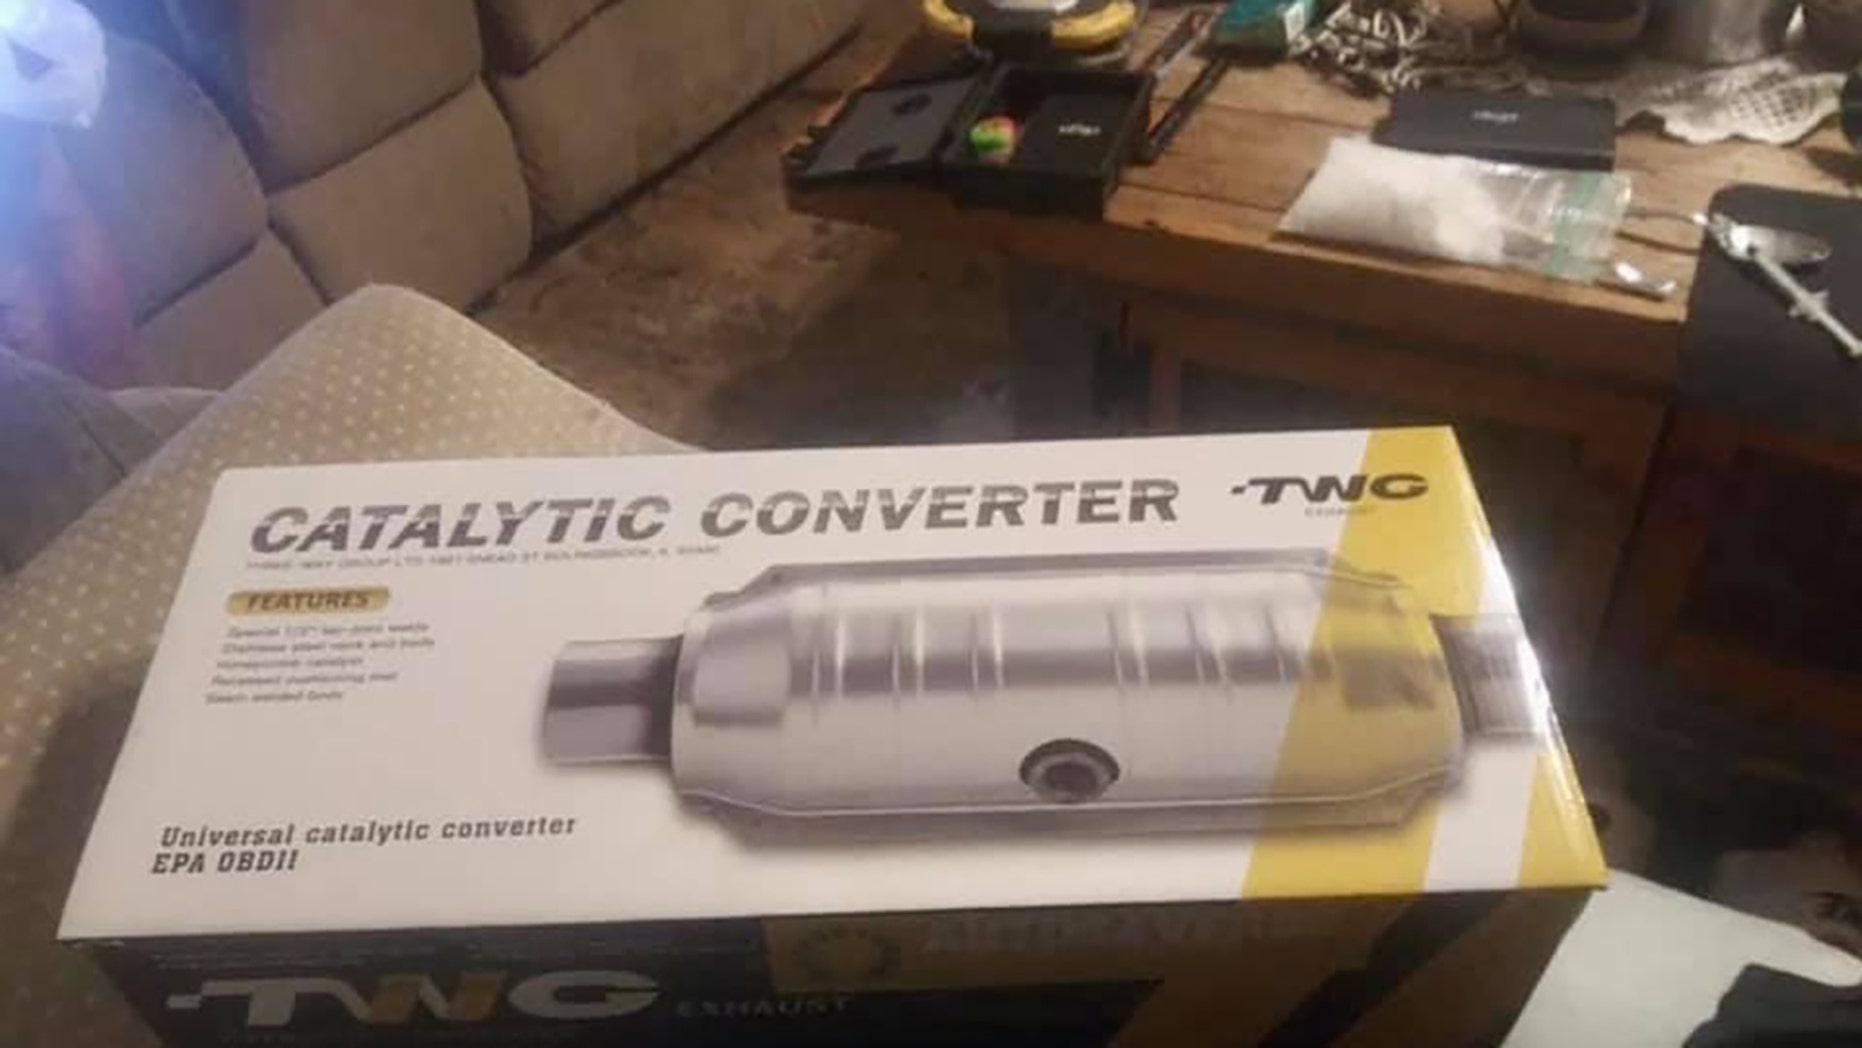 James Kertz posted an ad on Facebook for a catalytic converter with a large bag of meth and a syringe on the coffee table